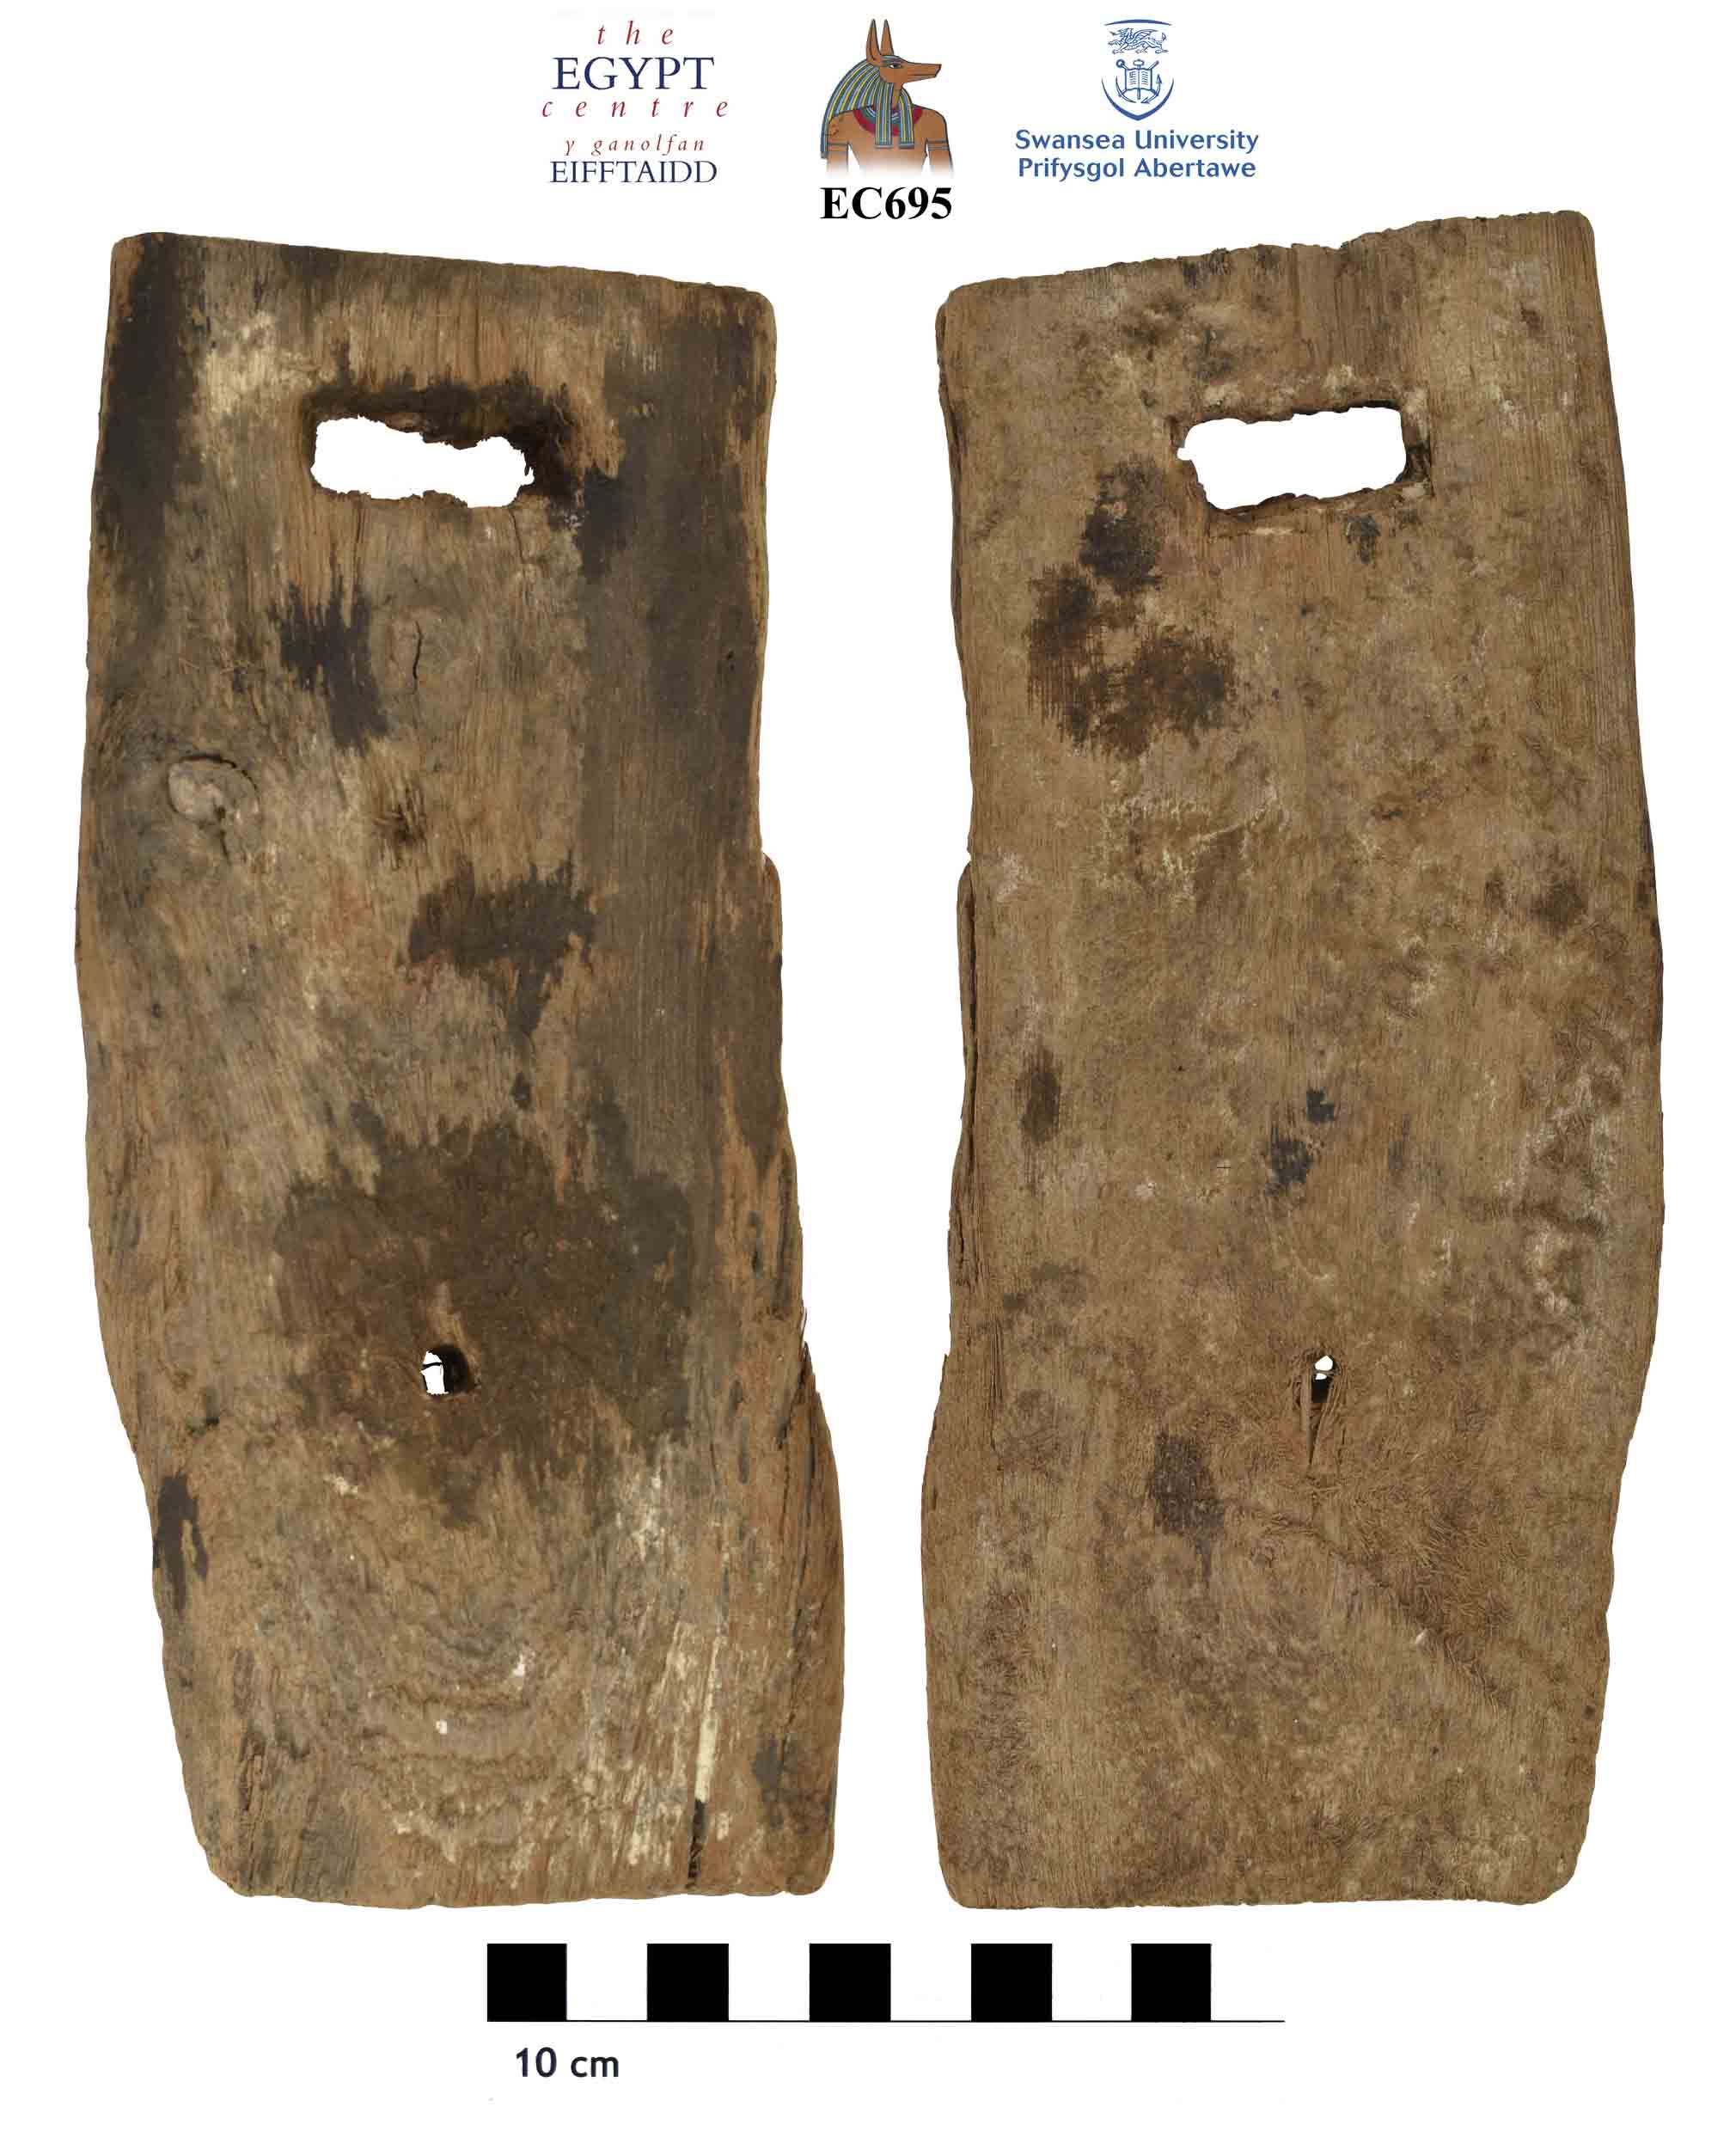 Image for: Base from a wooden funerary figure